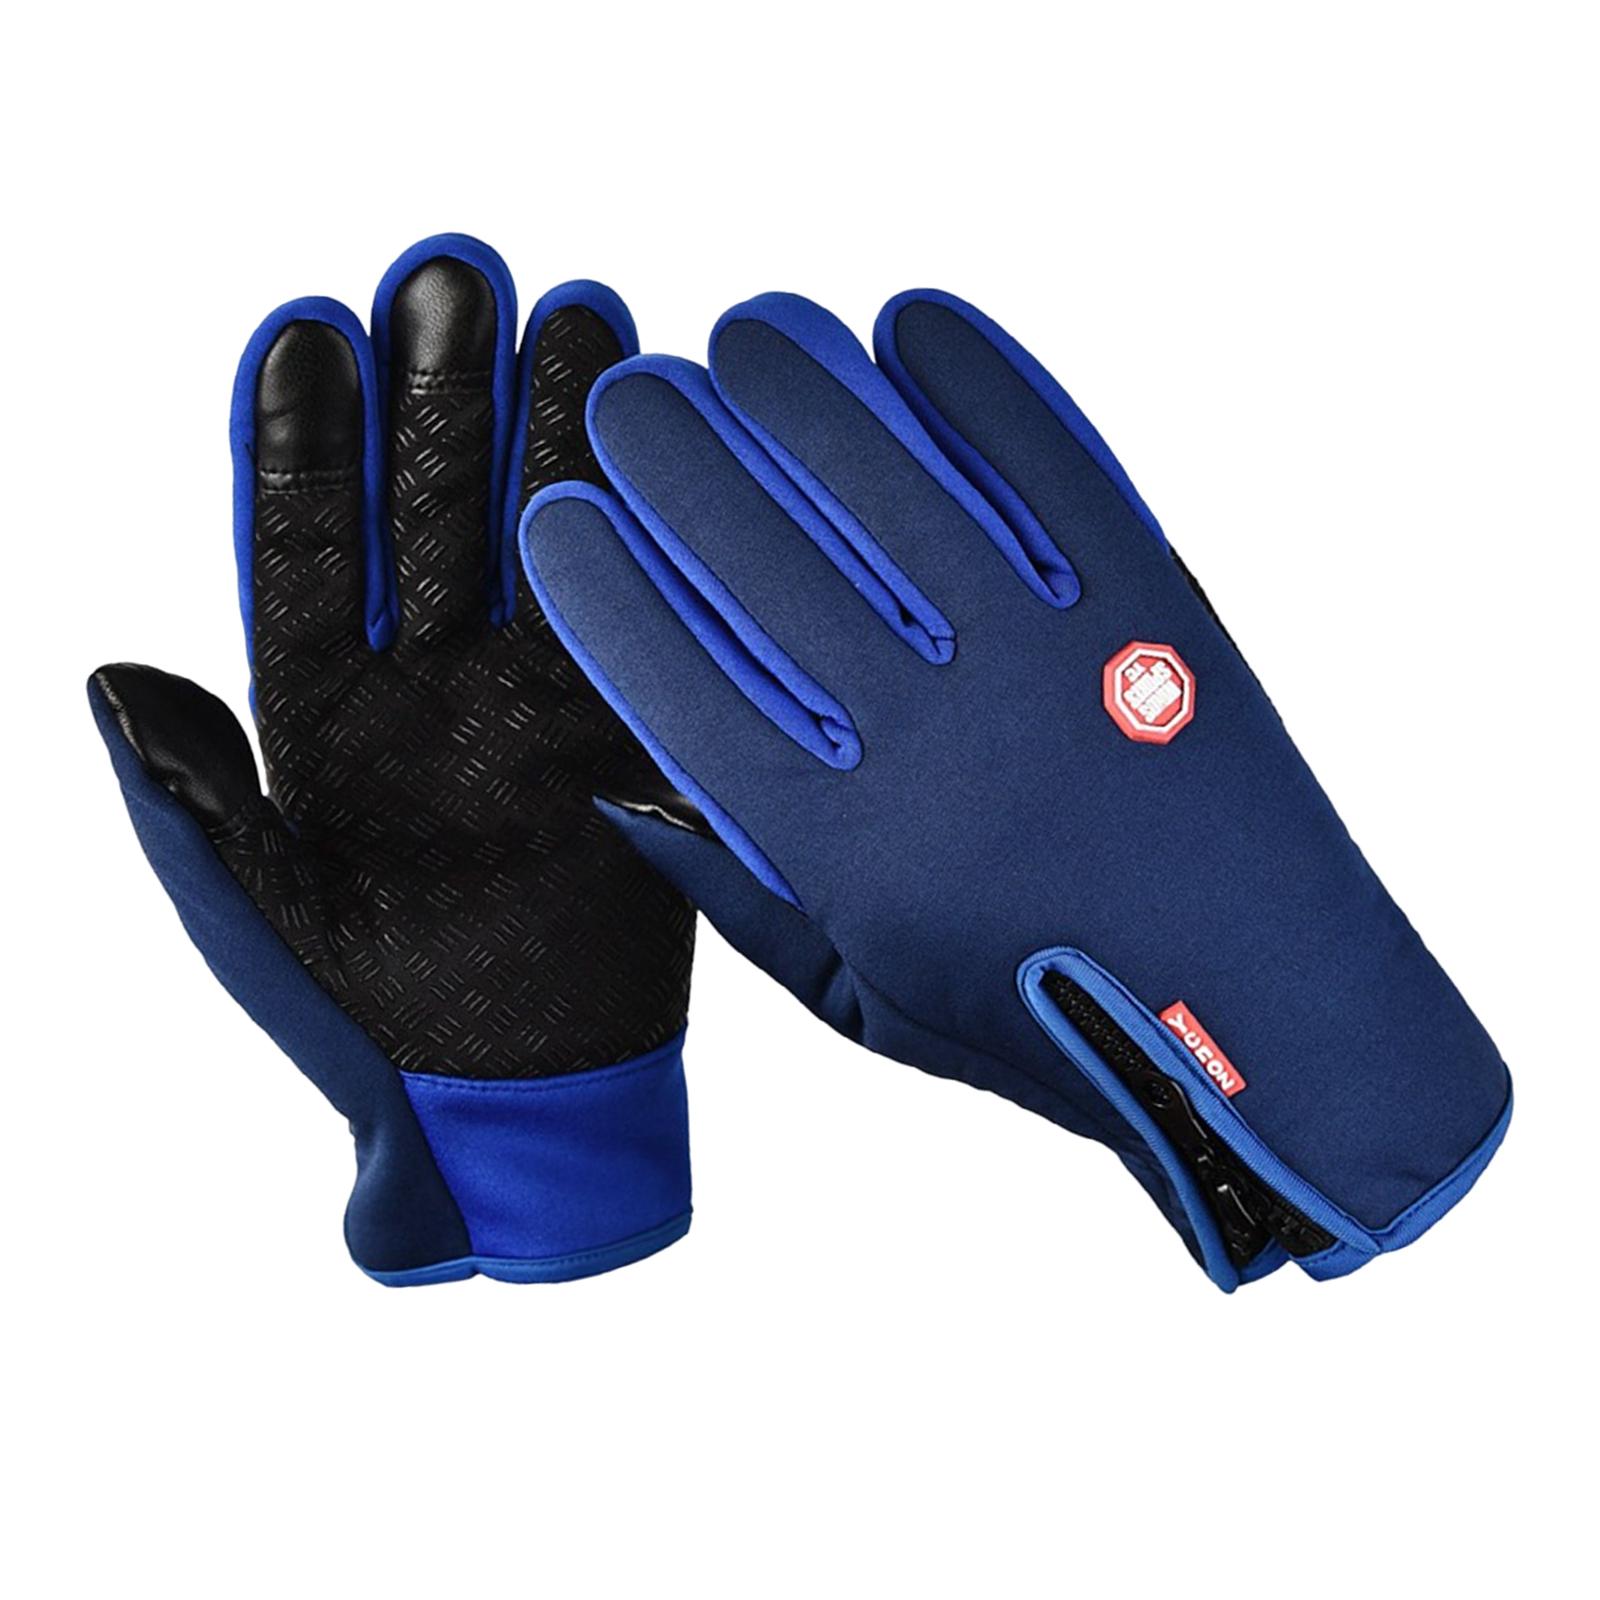 Winter Gloves Nonslip Thermal Gloves for Outdoor Running Sports Motorcycle Blue M